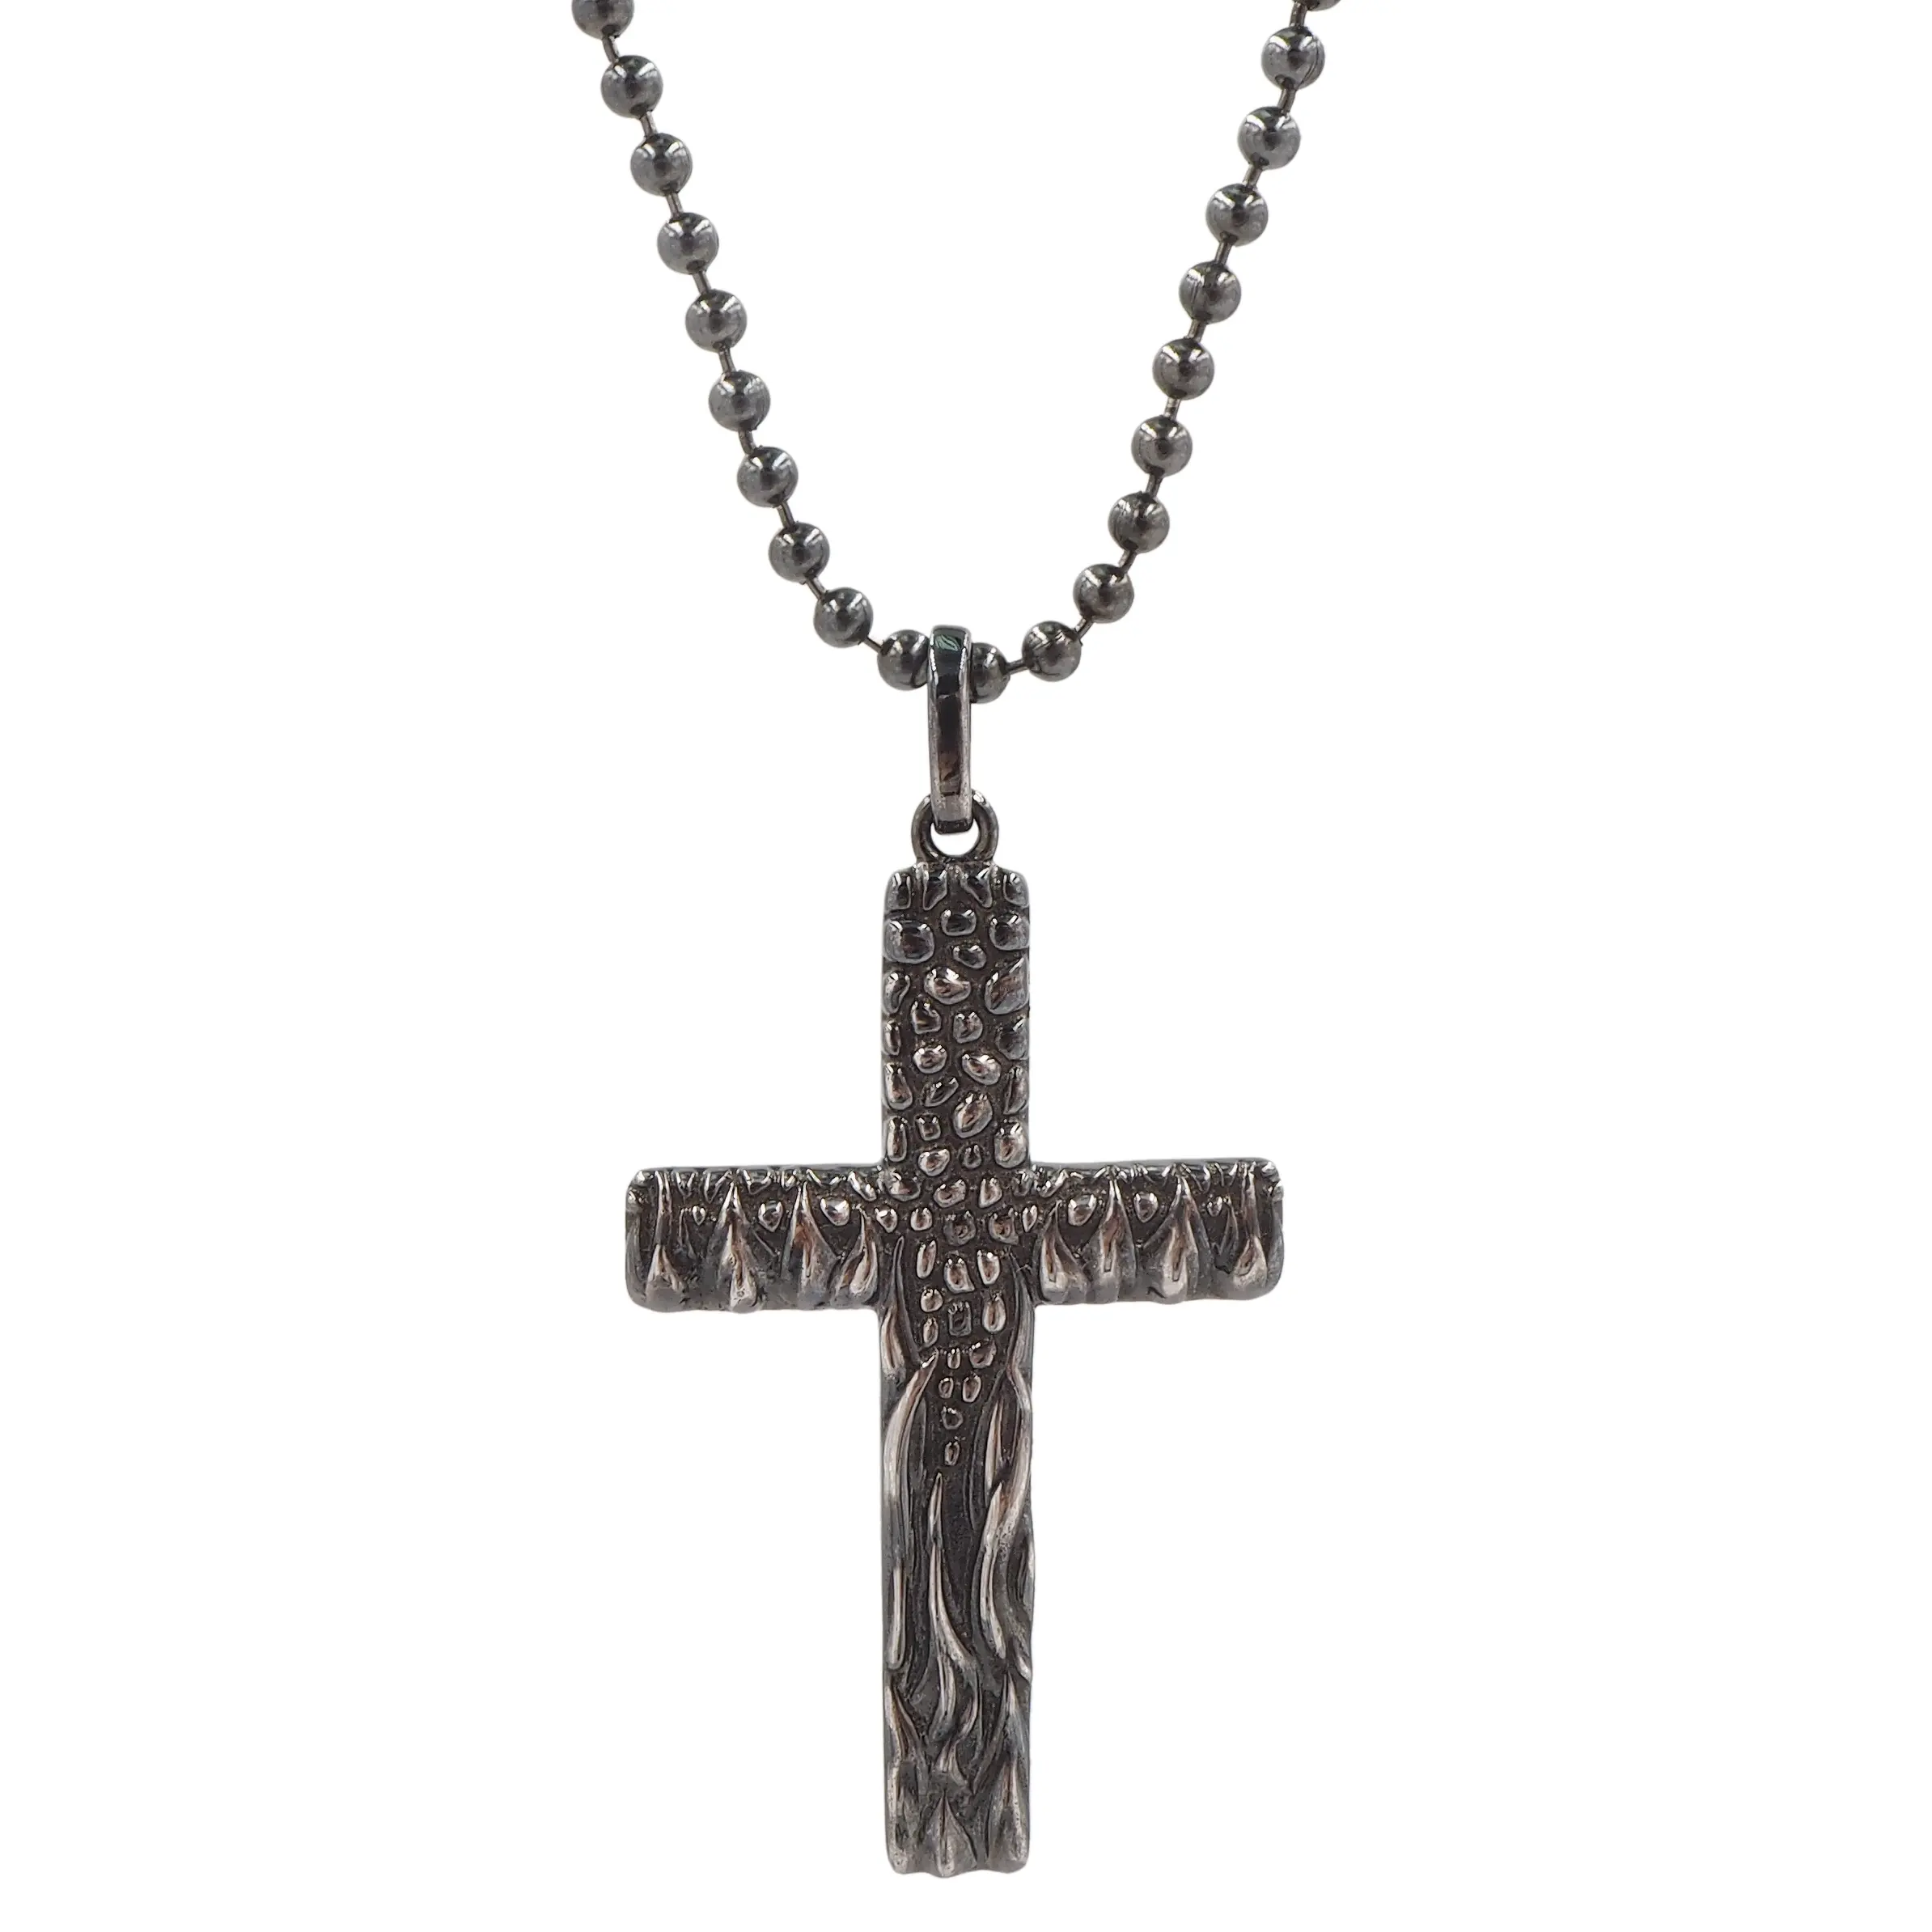 Sterling Silver Jewelry 925 Sterling Silver Cross Necklace For Men Black Cross Pendant Wholesales Jewelry